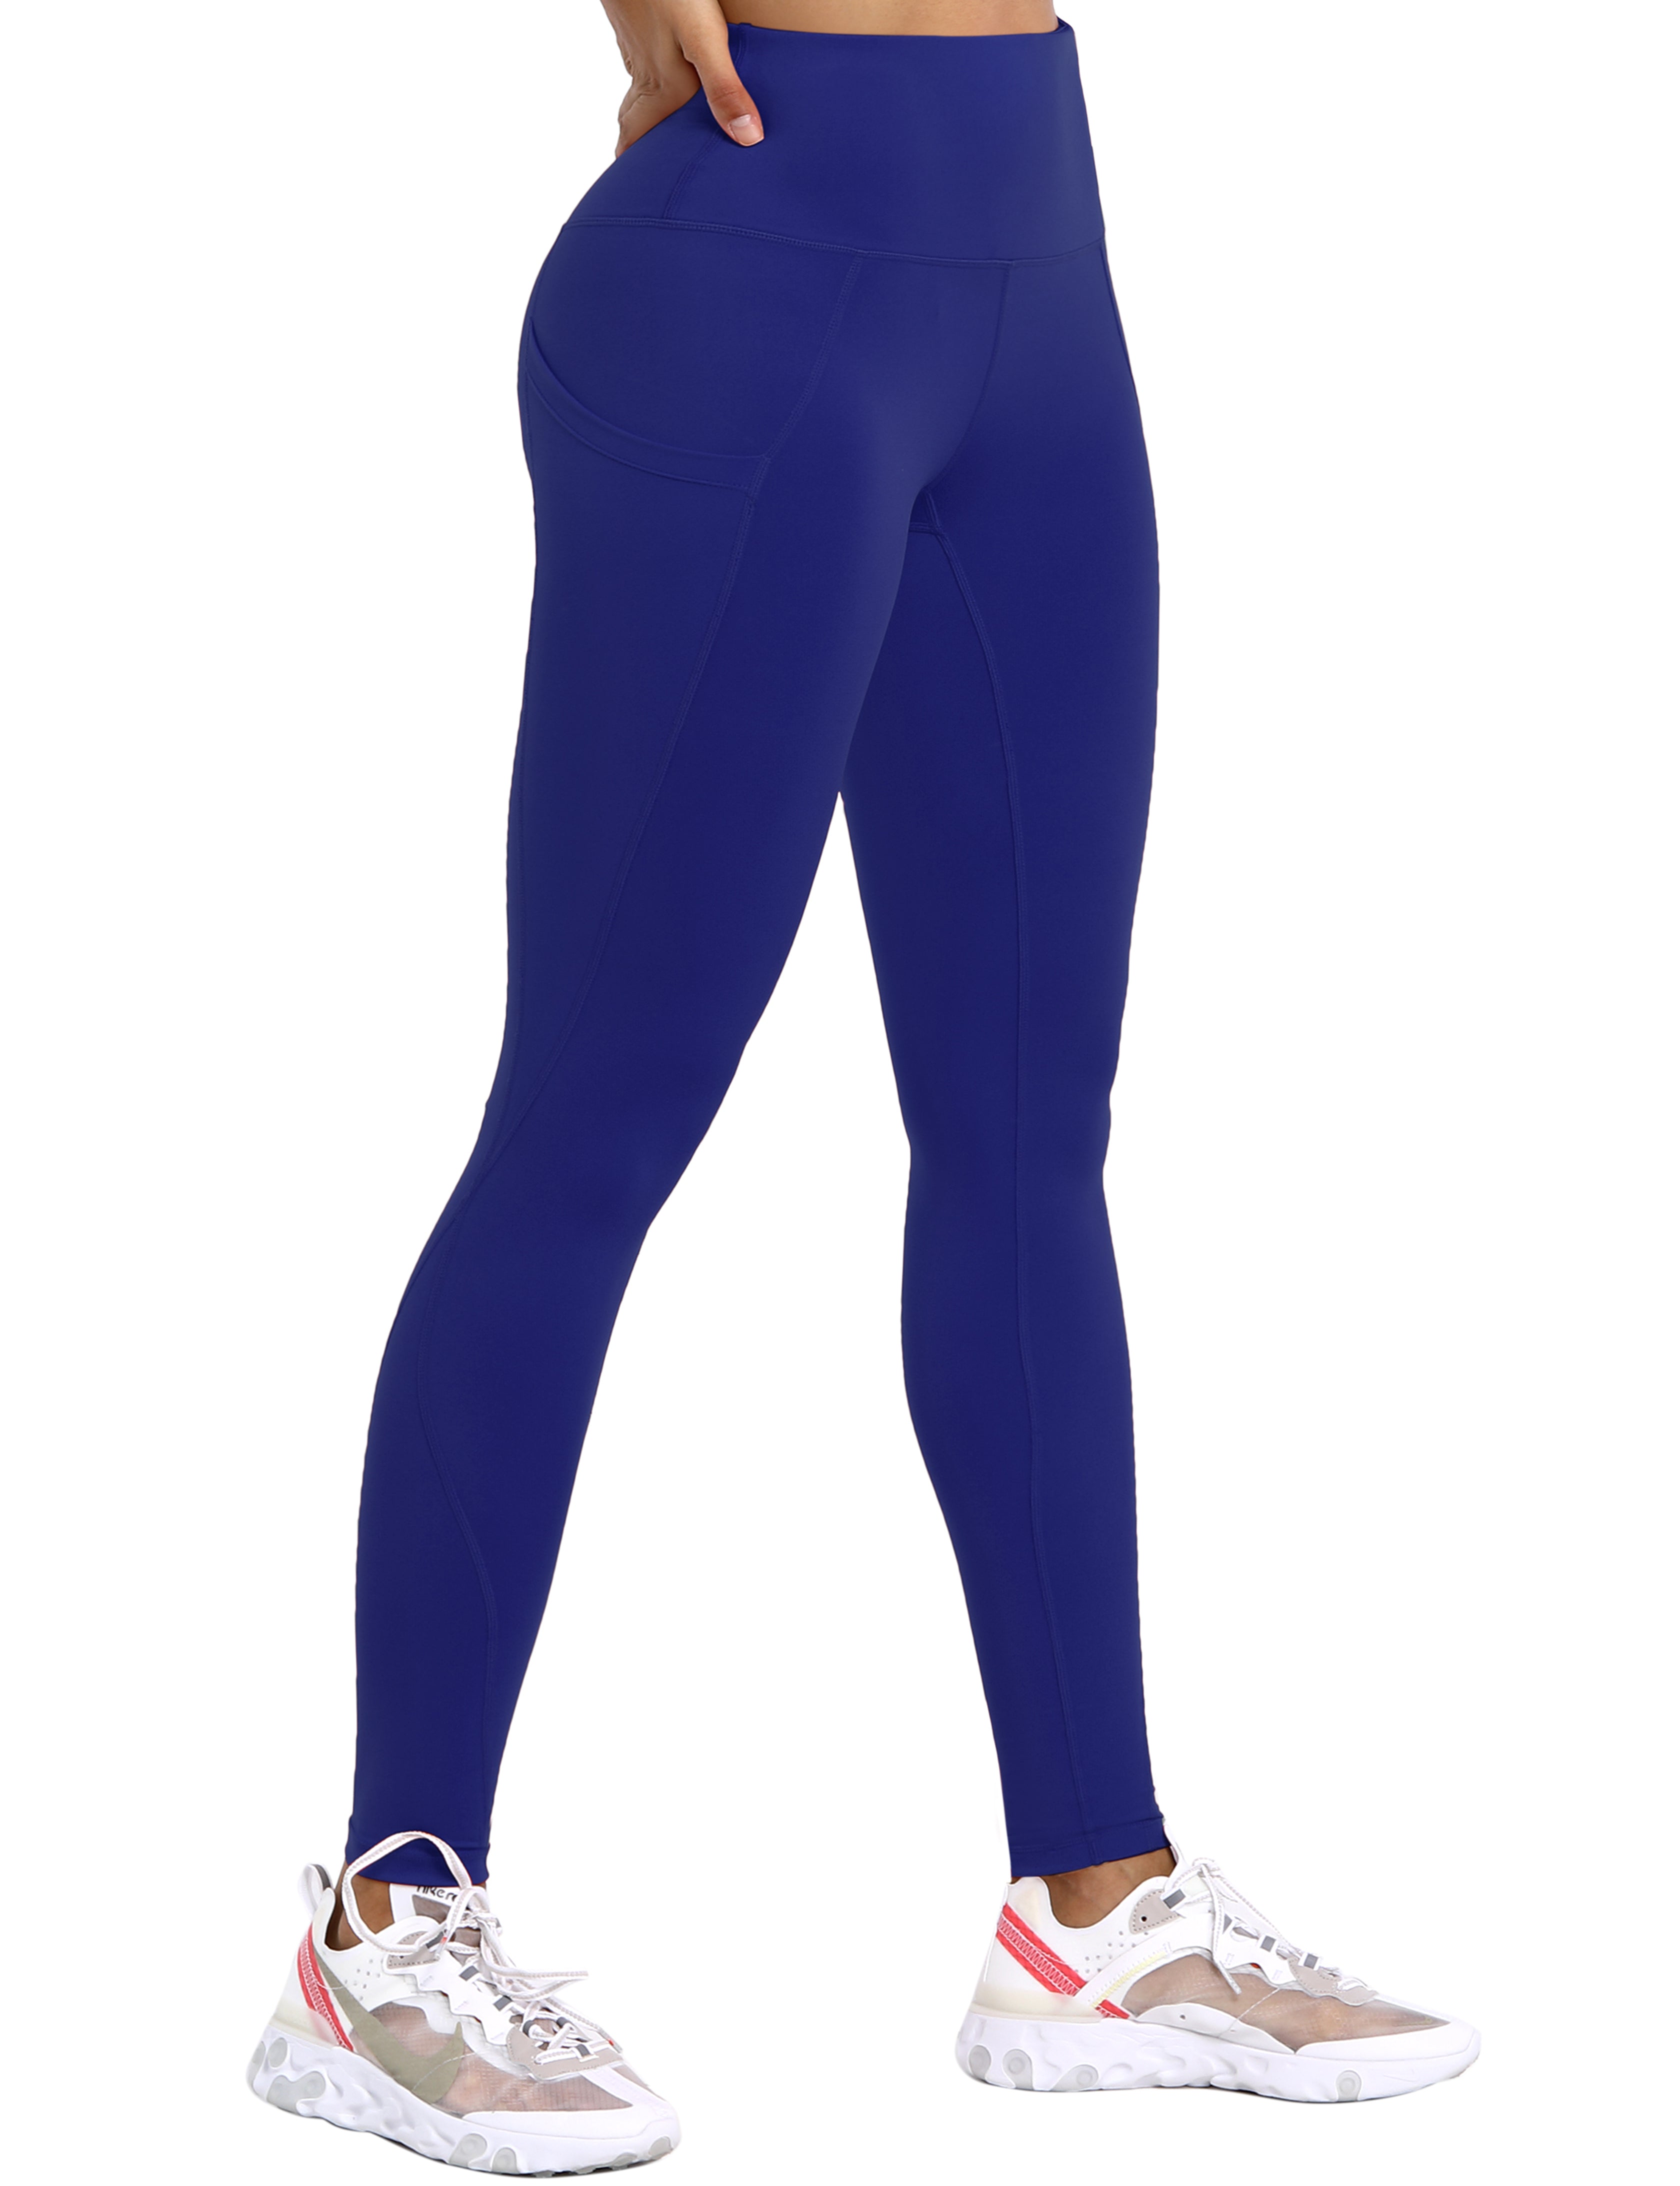 High Waist Side Pockets Yoga Pants navy 75% Nylon, 25% Spandex Fabric doesn't attract lint easily 4-way stretch No see-through Moisture-wicking Tummy control Inner pocket